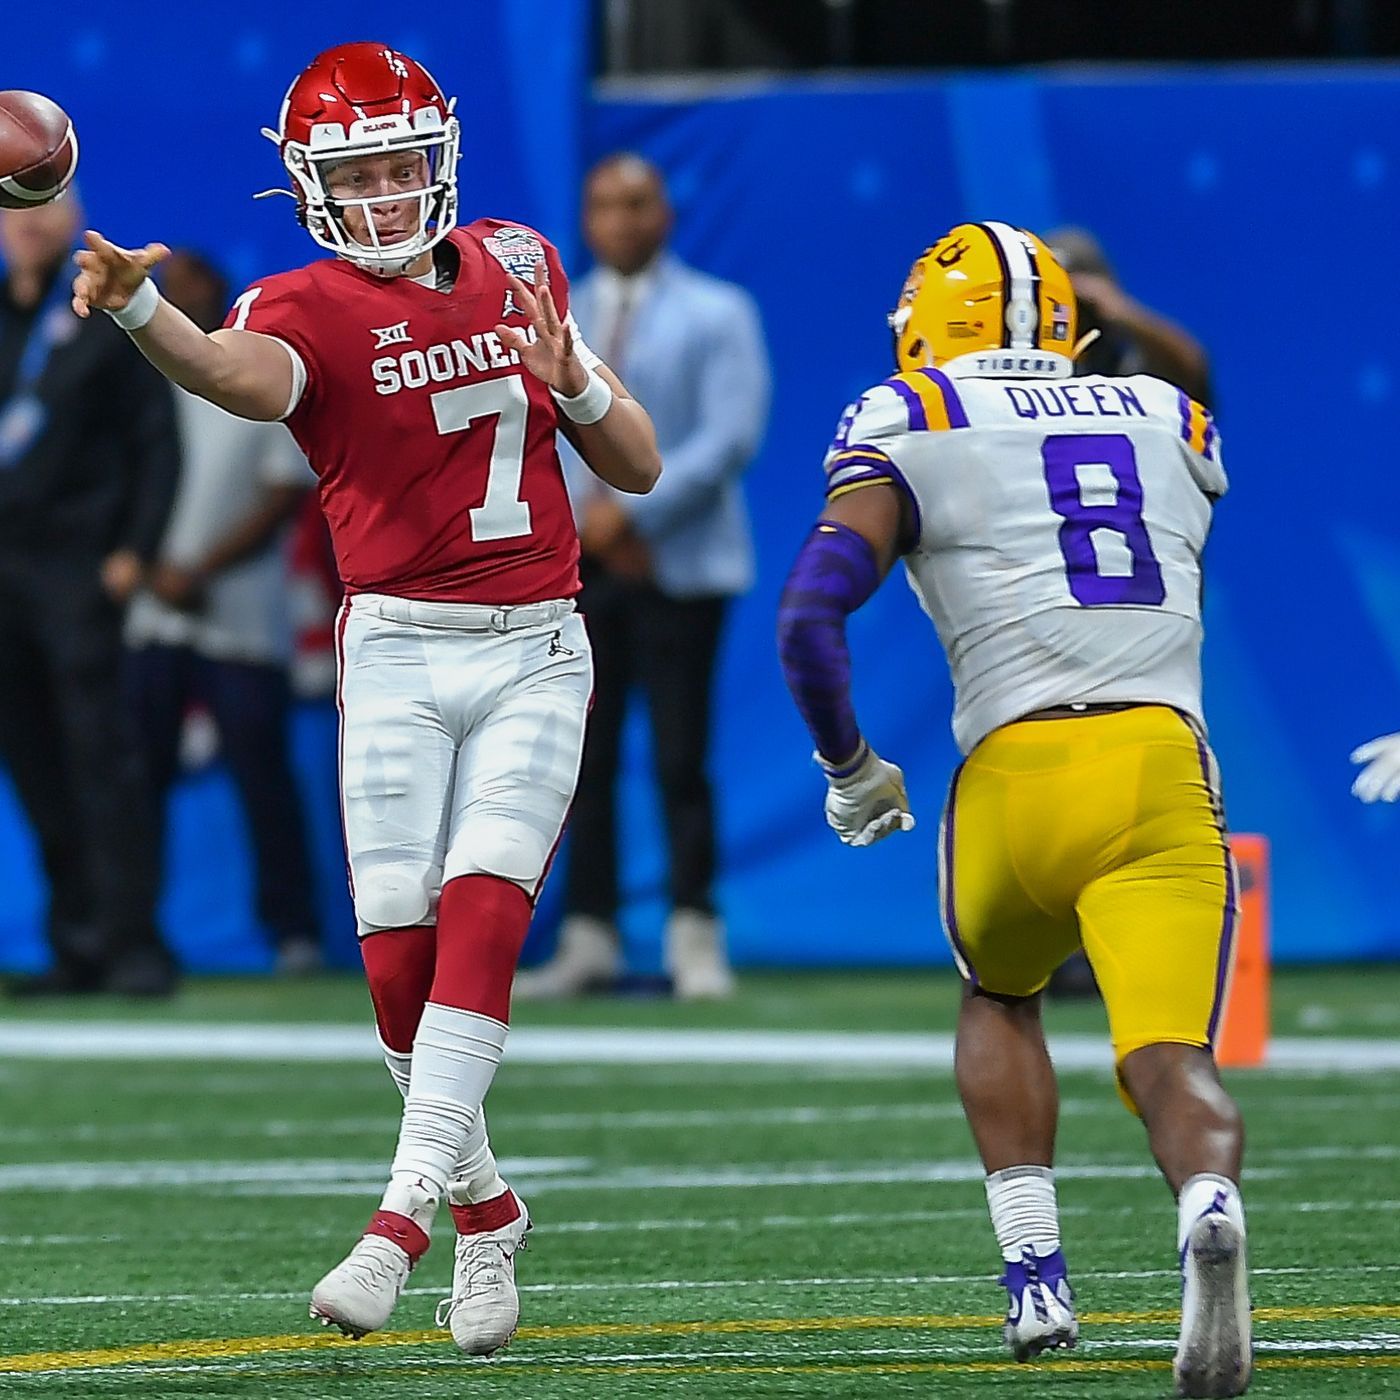 Oklahoma Football: OU's Over Under Win Total Now Set At 8. Spencer Rattler Compared To Patrick Mahomes And Cream Machine